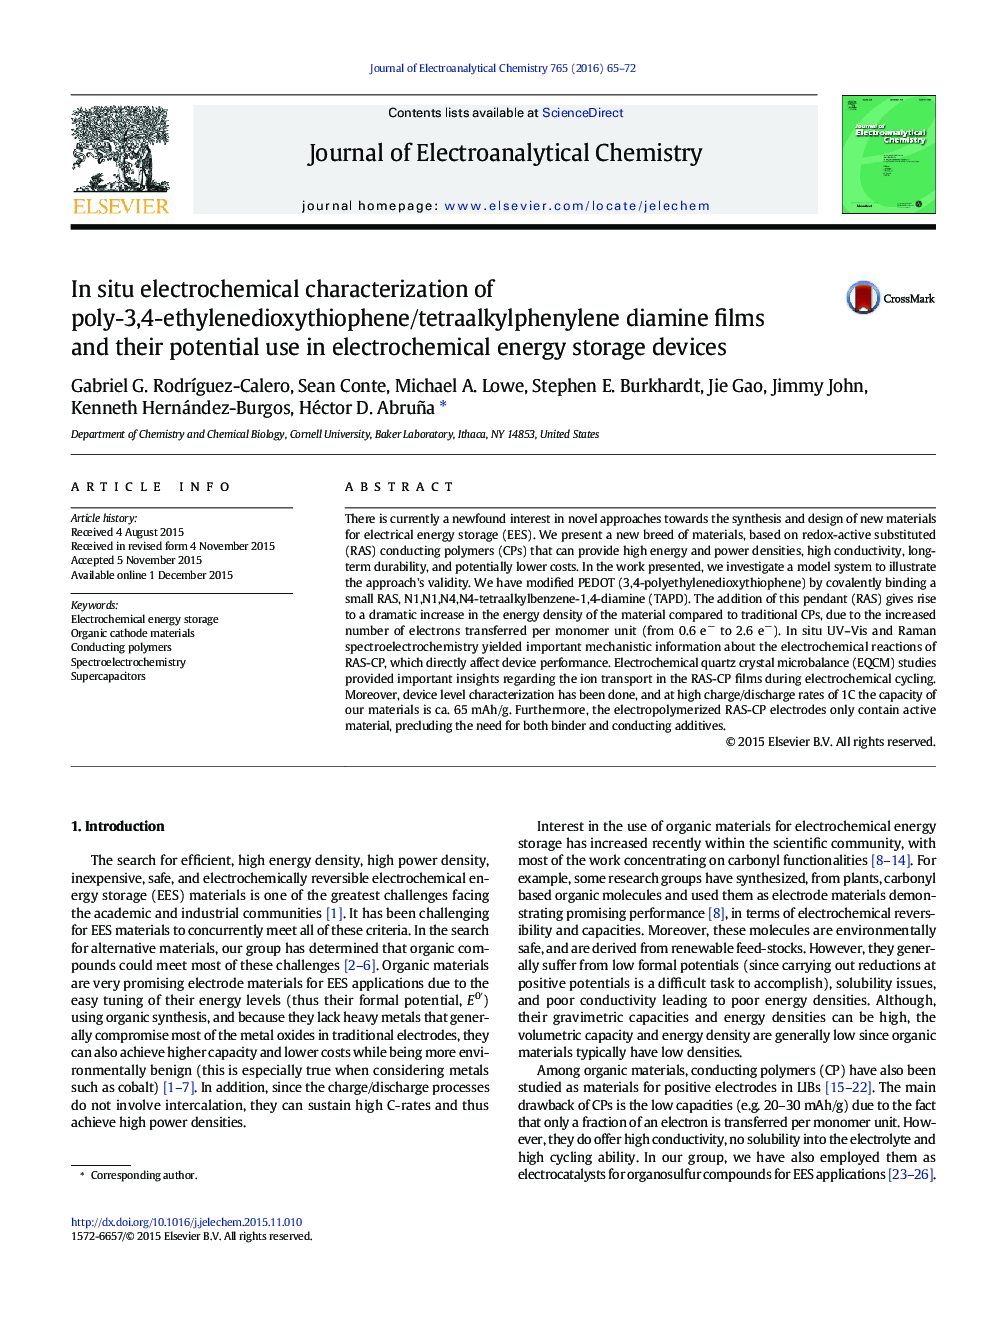 In situ electrochemical characterization of poly-3,4-ethylenedioxythiophene/tetraalkylphenylene diamine films and their potential use in electrochemical energy storage devices